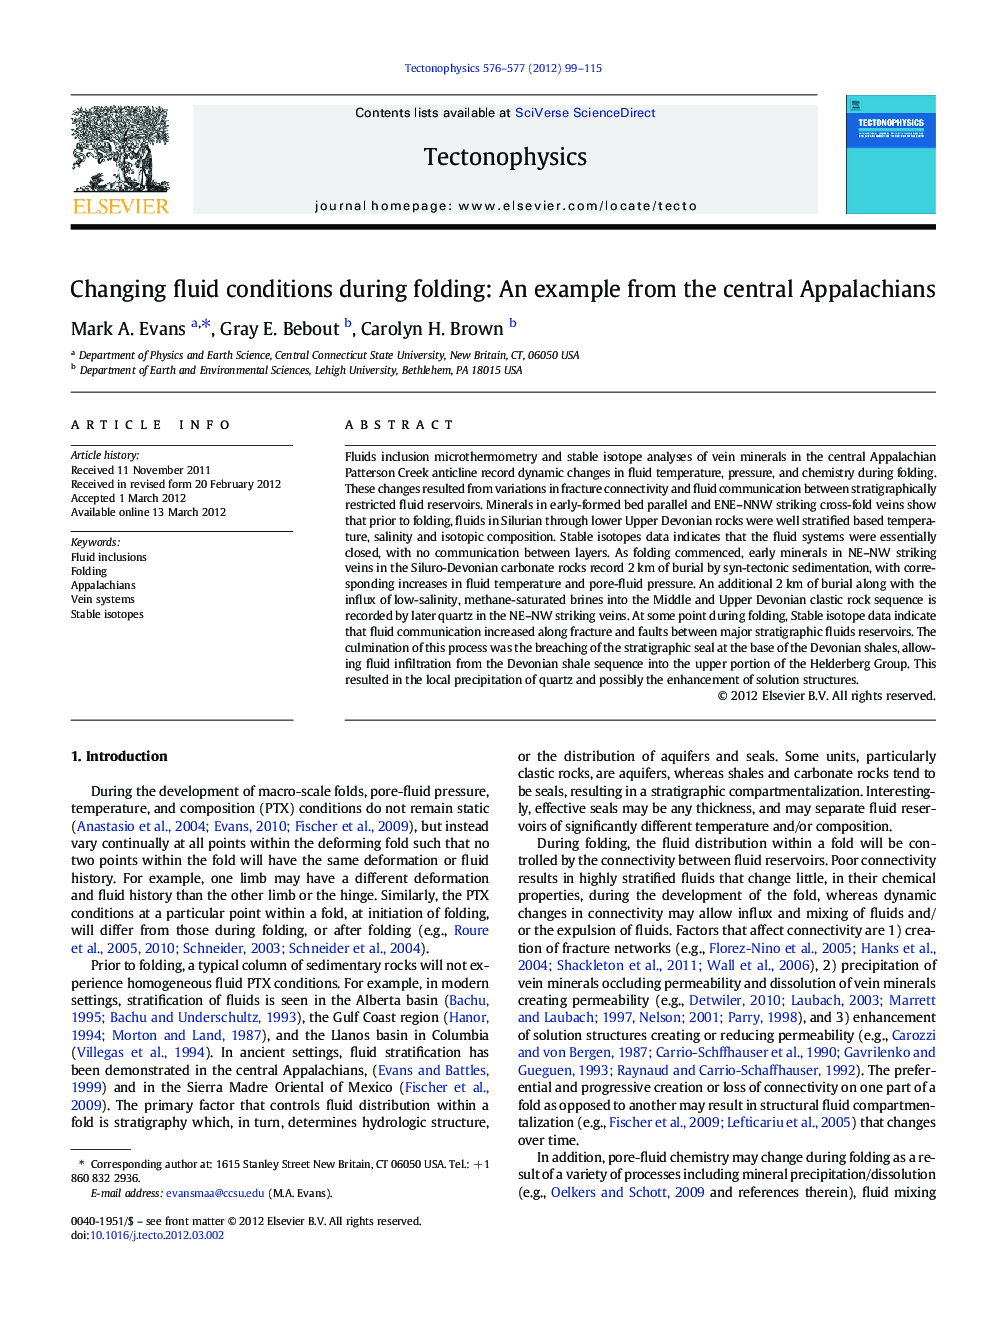 Changing fluid conditions during folding: An example from the central Appalachians